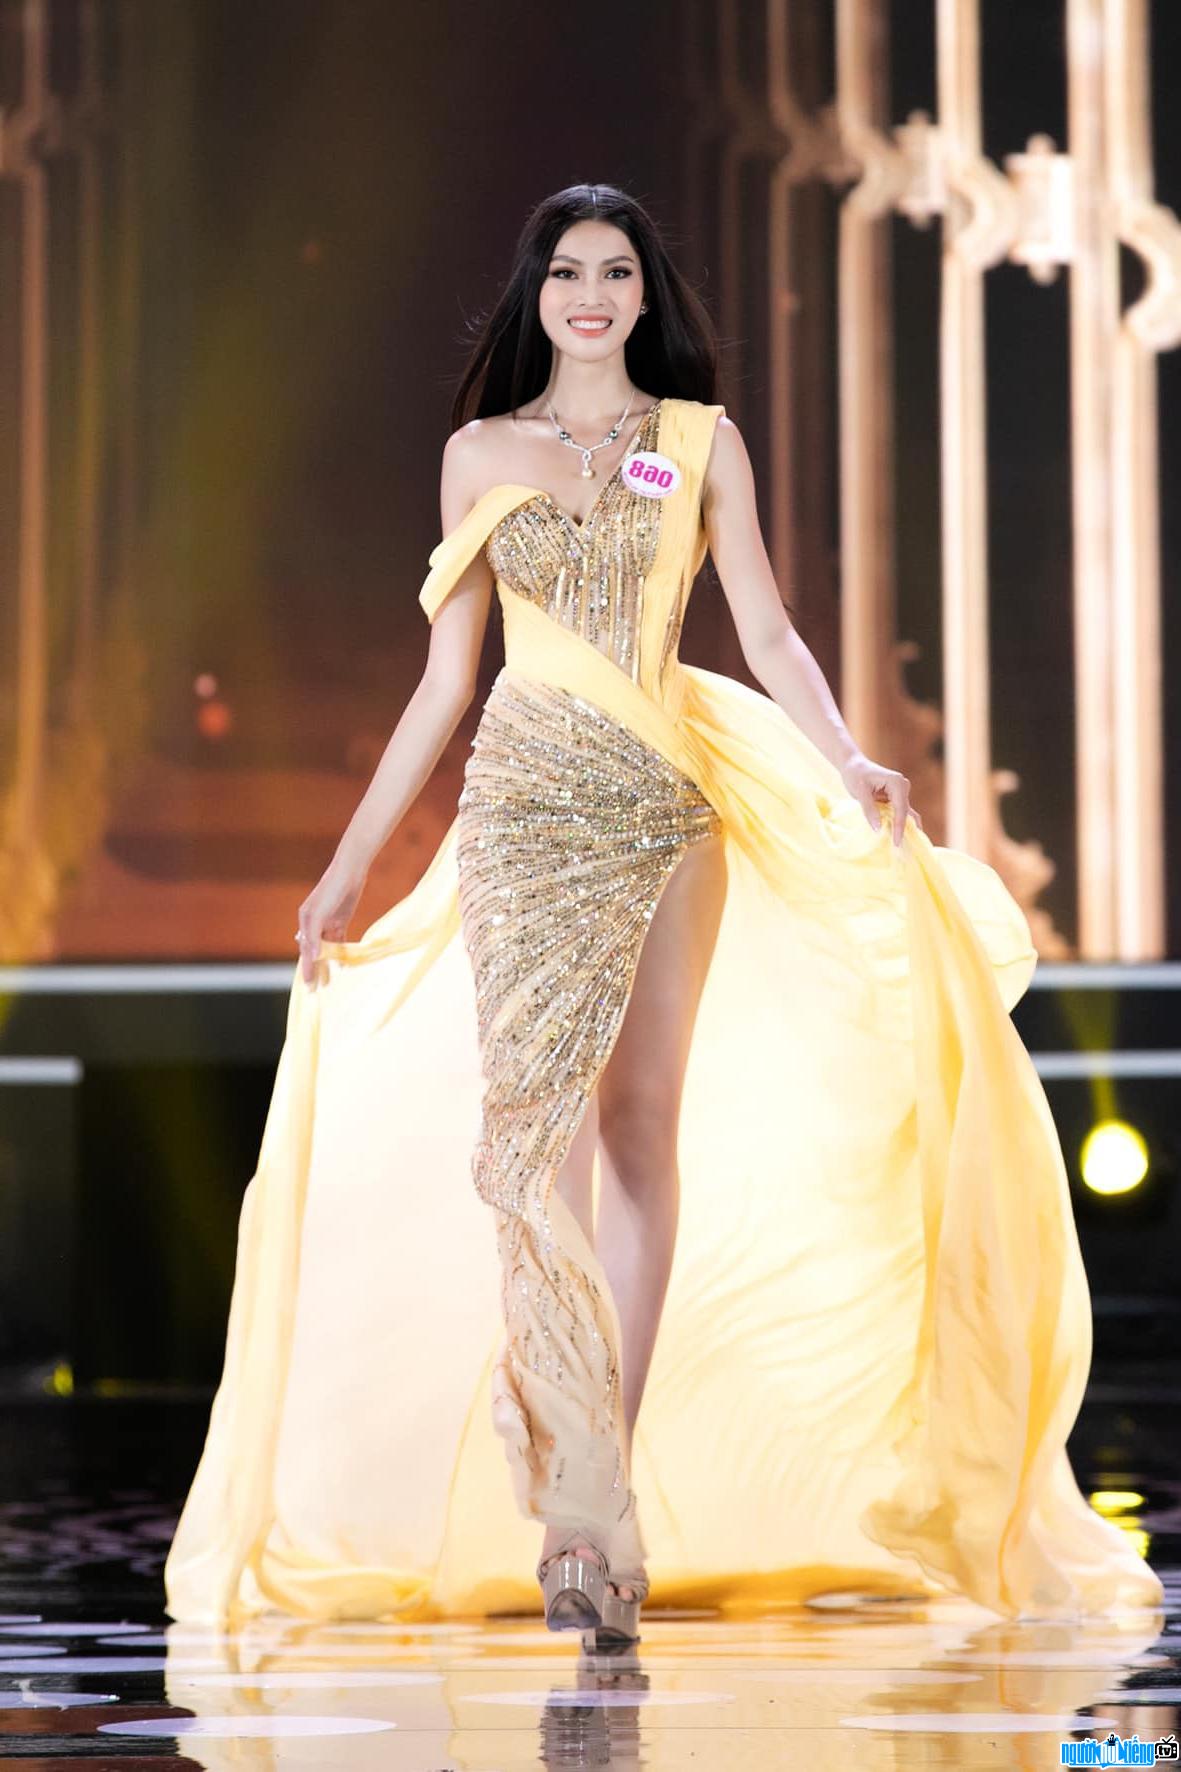 The gorgeous image of Nguyen Le Ngoc Thao in her contest